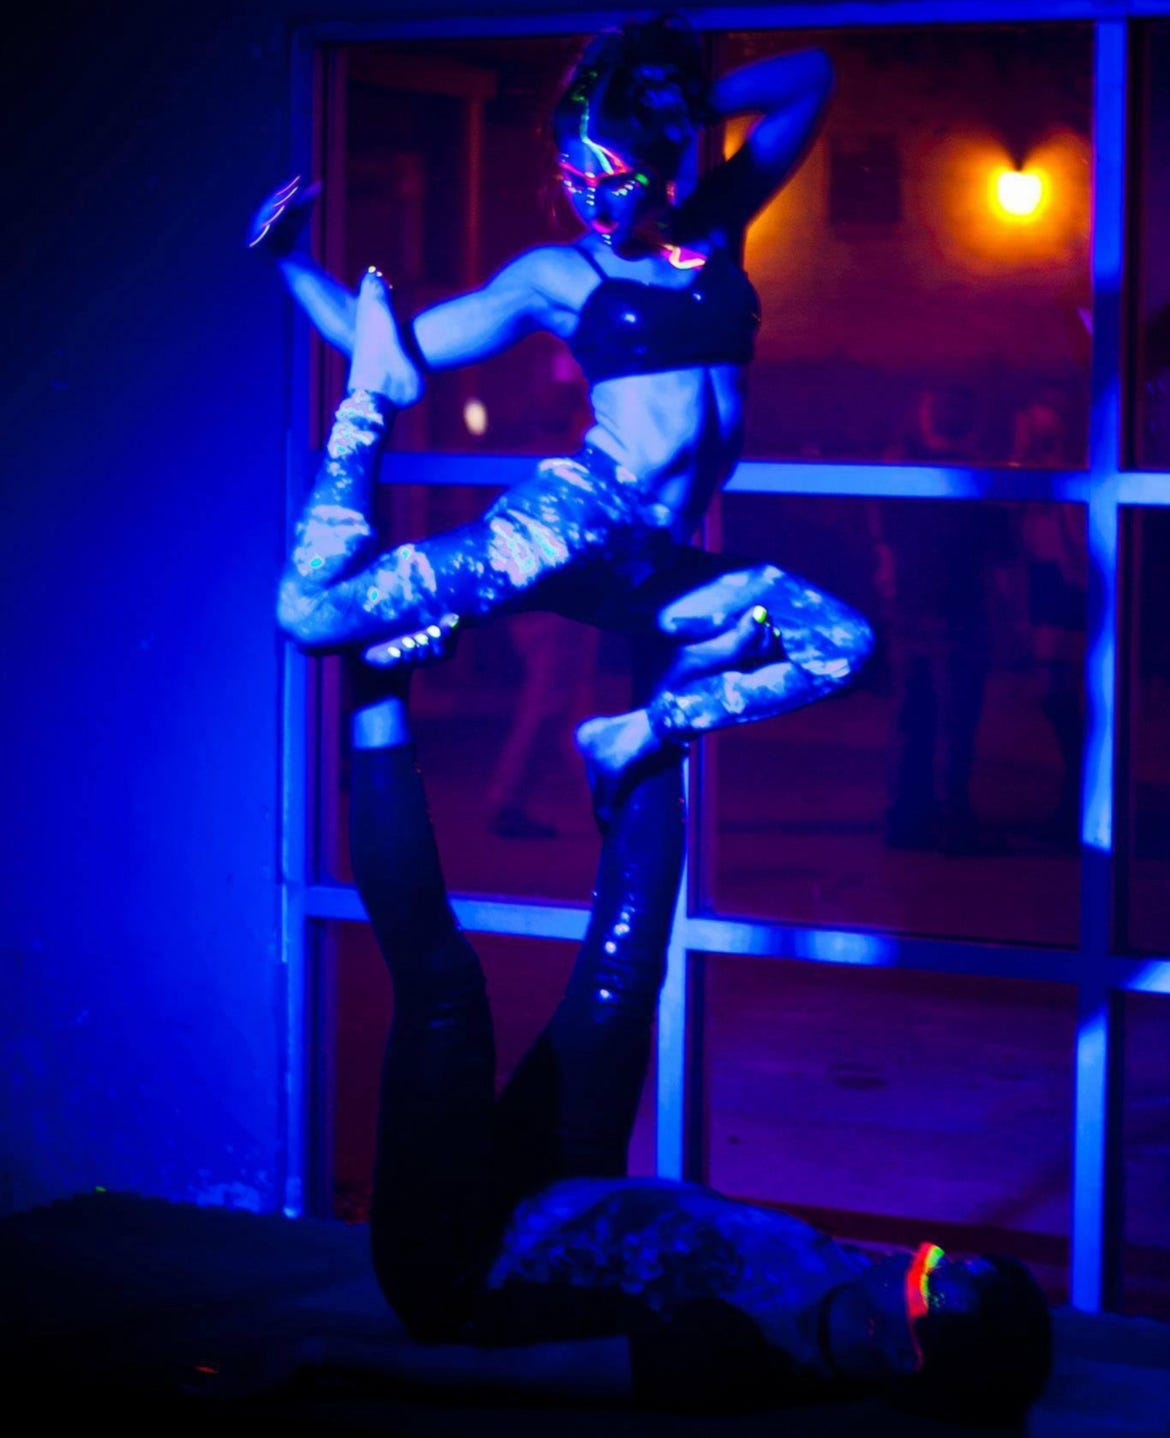 Lyric doing AcroYoga, they are balanced on the feet of a tall base, doing a complex pose. They scene is a rave style party, with black lights and glow paint. 